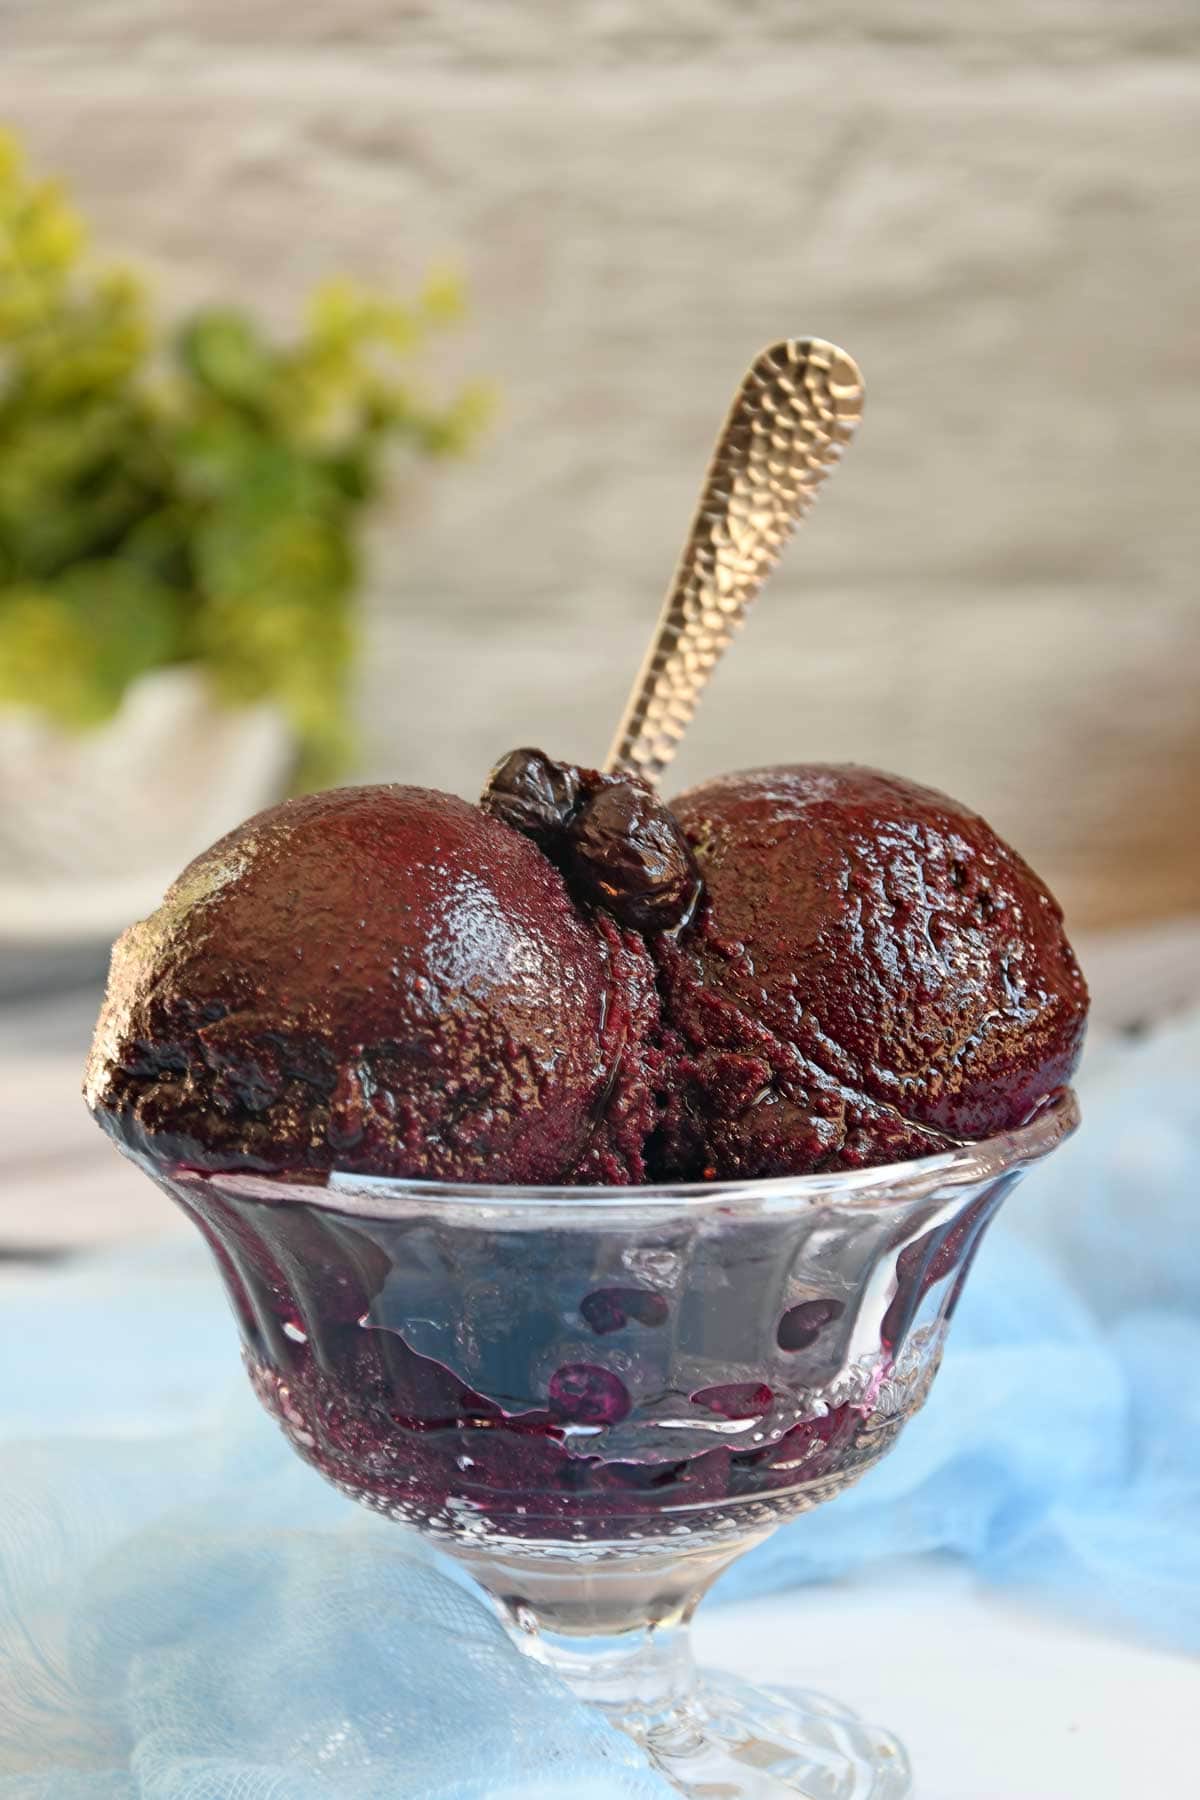 Blueberry Sorbet scoops in a glass bowl.